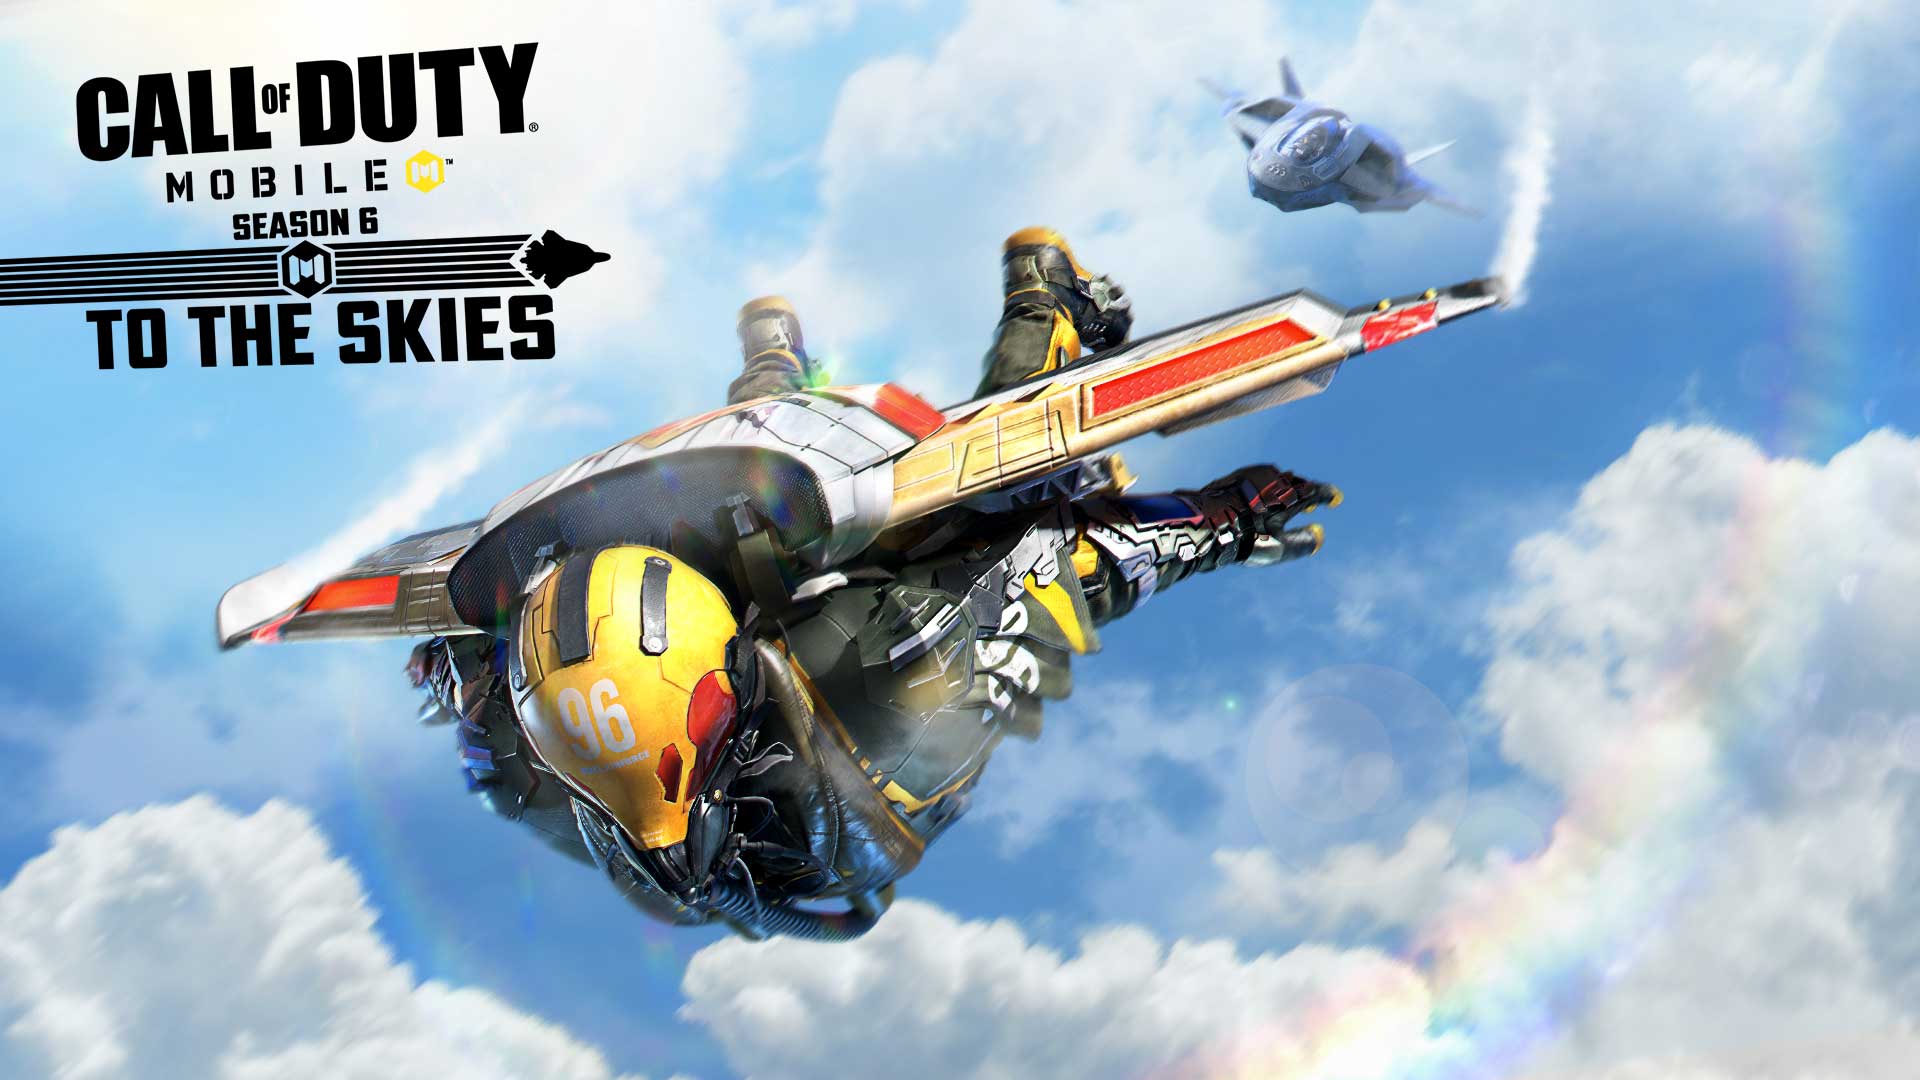 Activision releases Call of Duty Mobile Season 6 - “To the Skies”